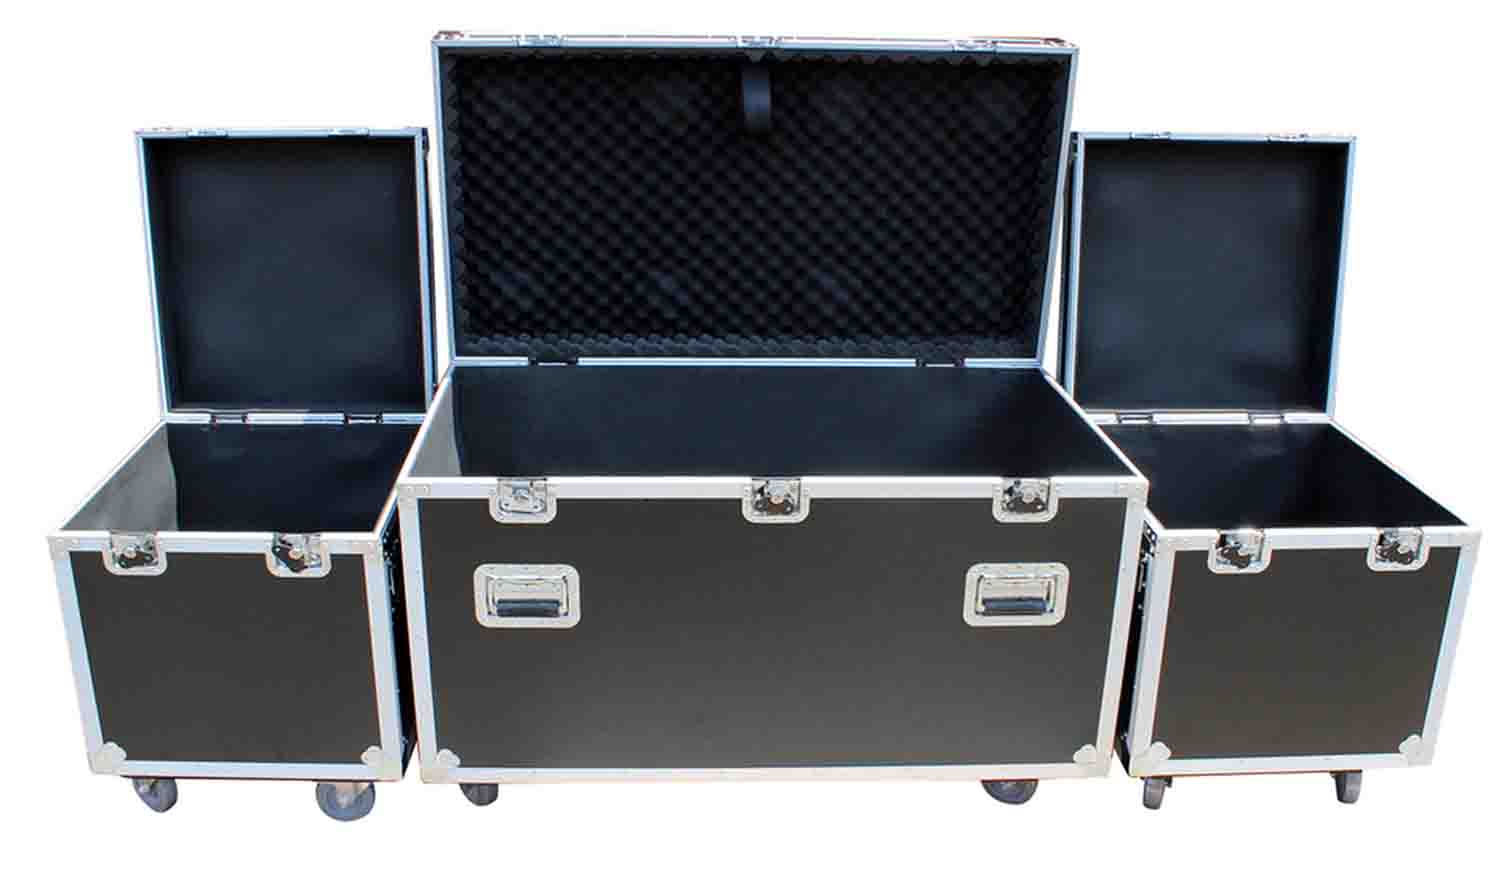 ProX XS-UTL3PKG Utility Storage ATA Style Road Cases 1 Large and 2 Half Size - 3 Case Package - Hollywood DJ